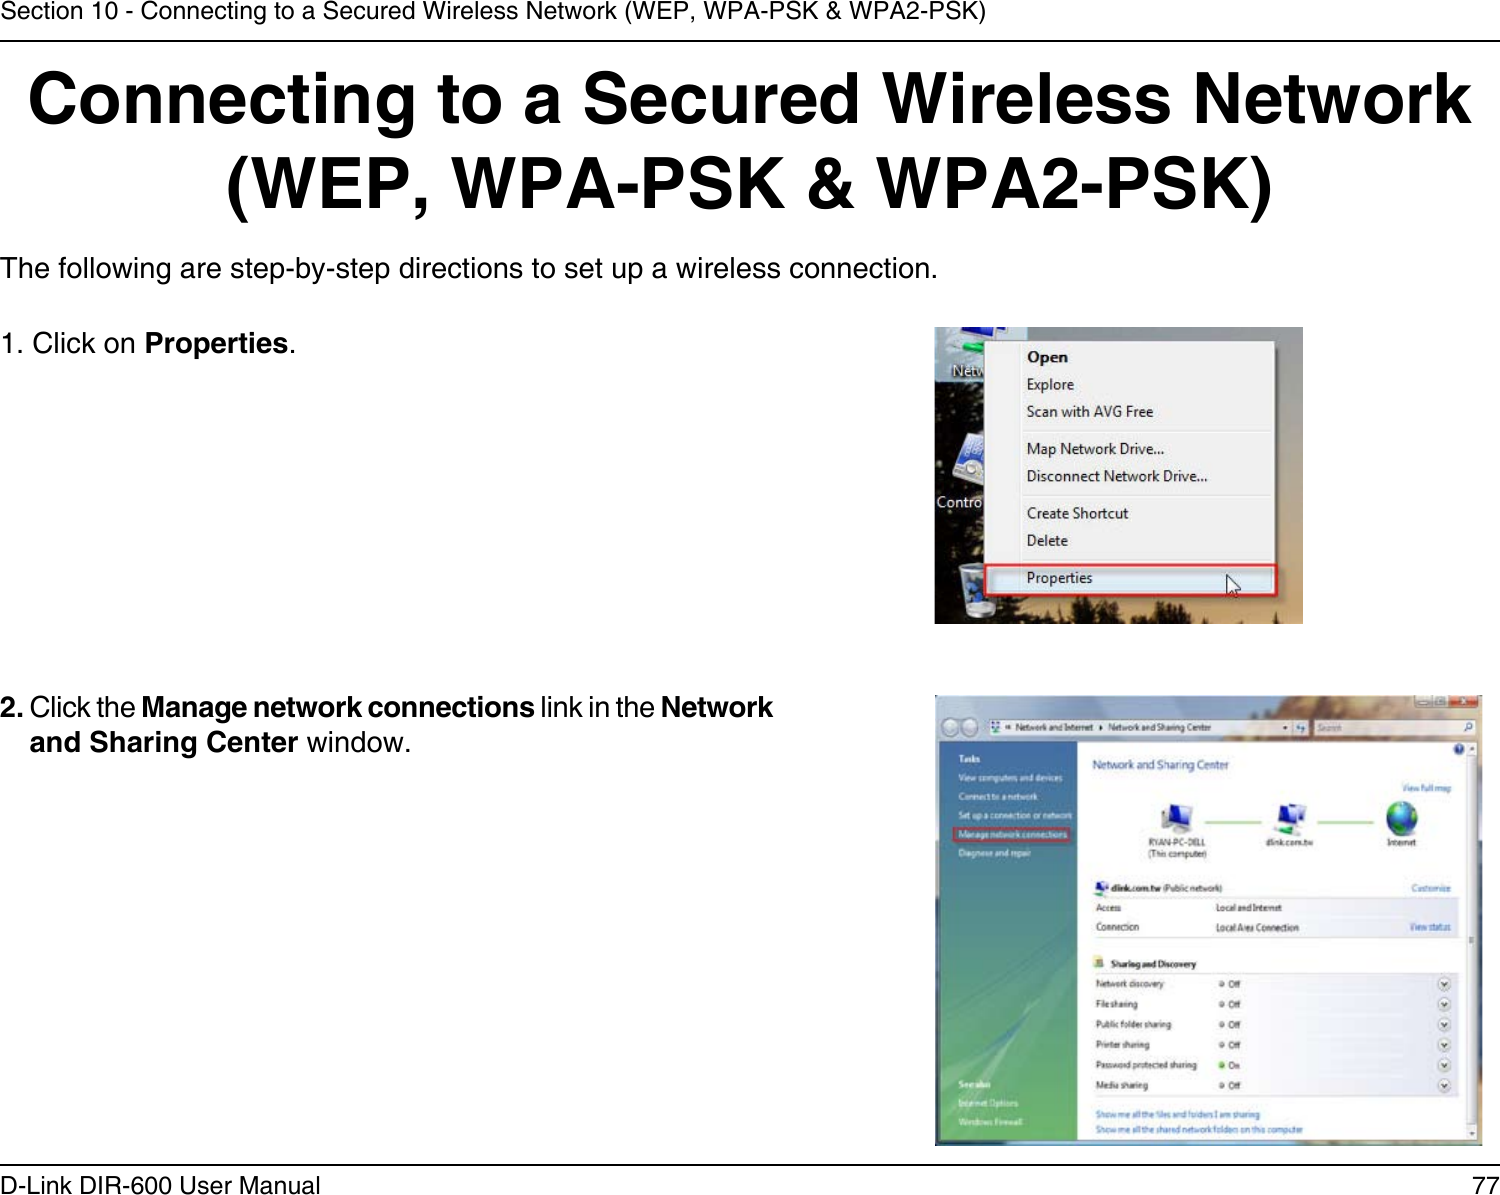 77D-Link DIR-600 User ManualSection 10 - Connecting to a Secured Wireless Network (WEP, WPA-PSK &amp; WPA2-PSK)Connecting to a Secured Wireless Network (WEP, WPA-PSK &amp; WPA2-PSK)The following are step-by-step directions to set up a wireless connection.2. Click the Manage network connections link in the Network and Sharing Center window. 1. Click on Properties.     